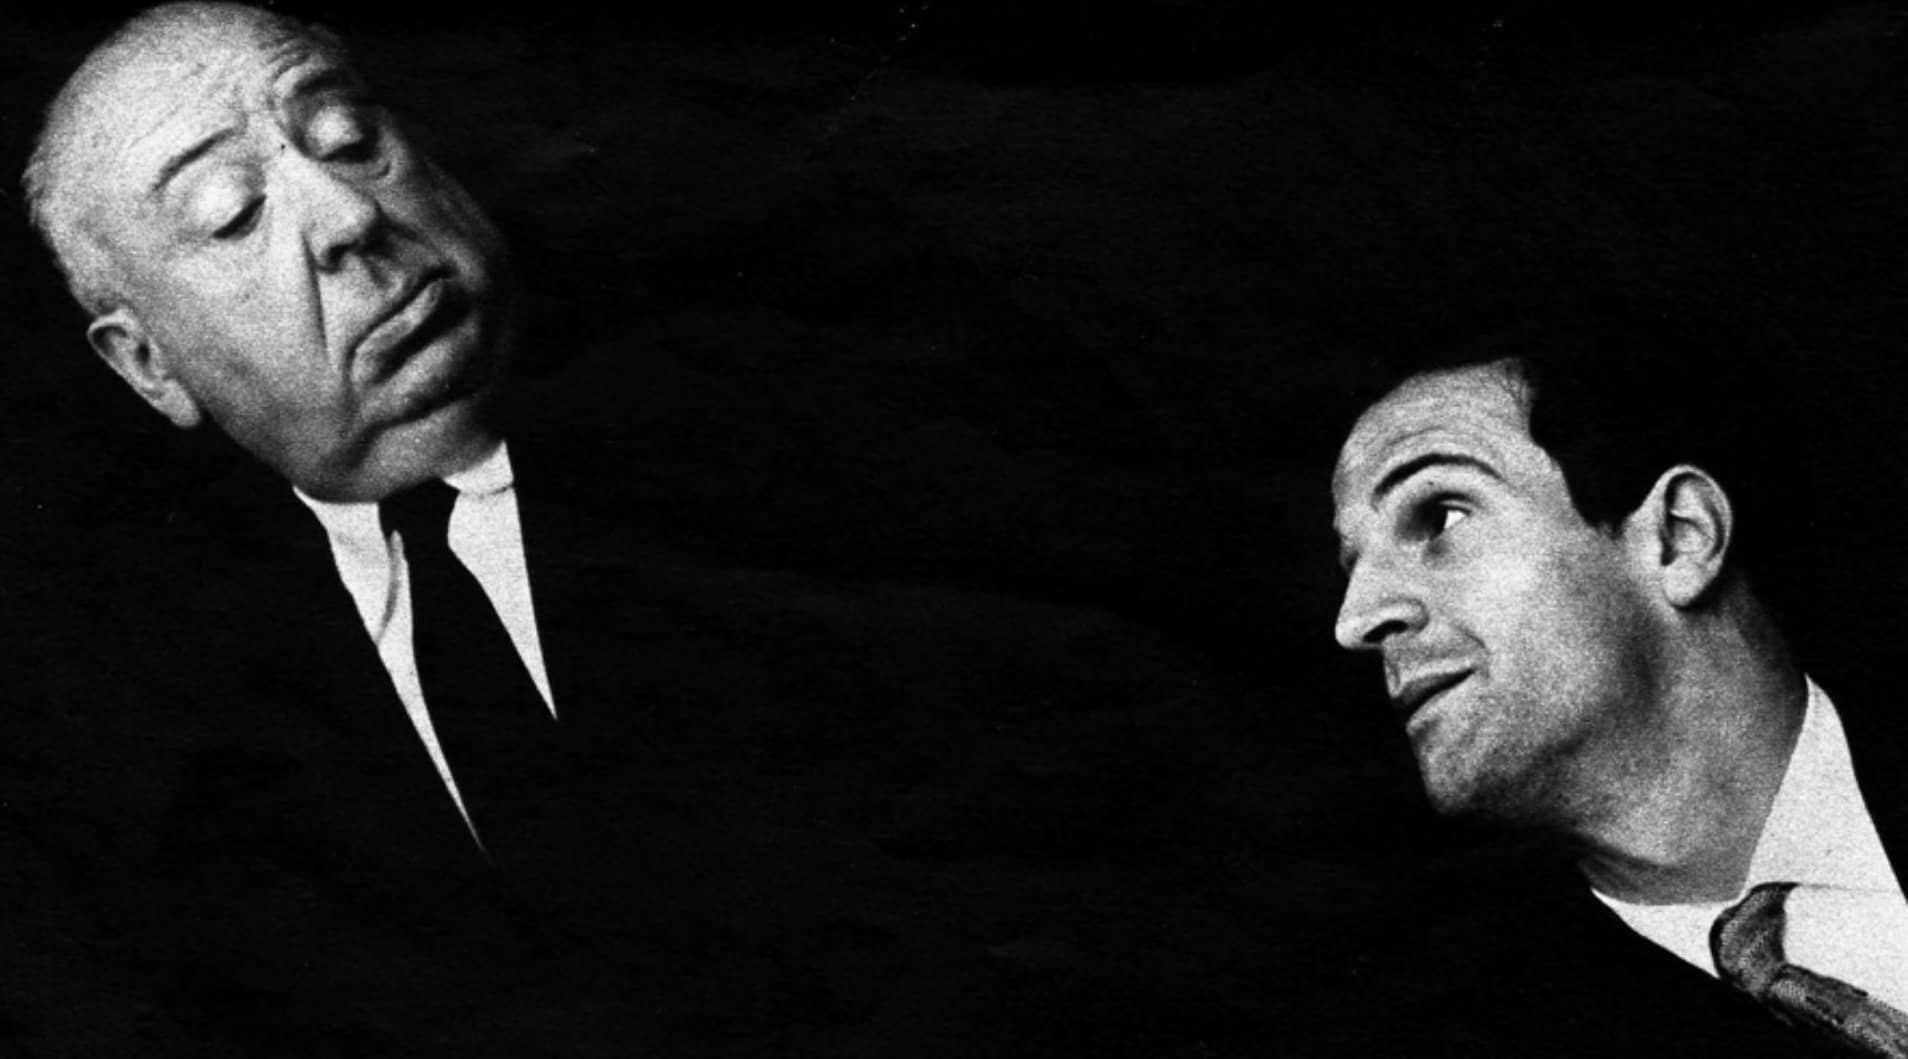 Alfred Hitchcock and François Truffaut in 1962